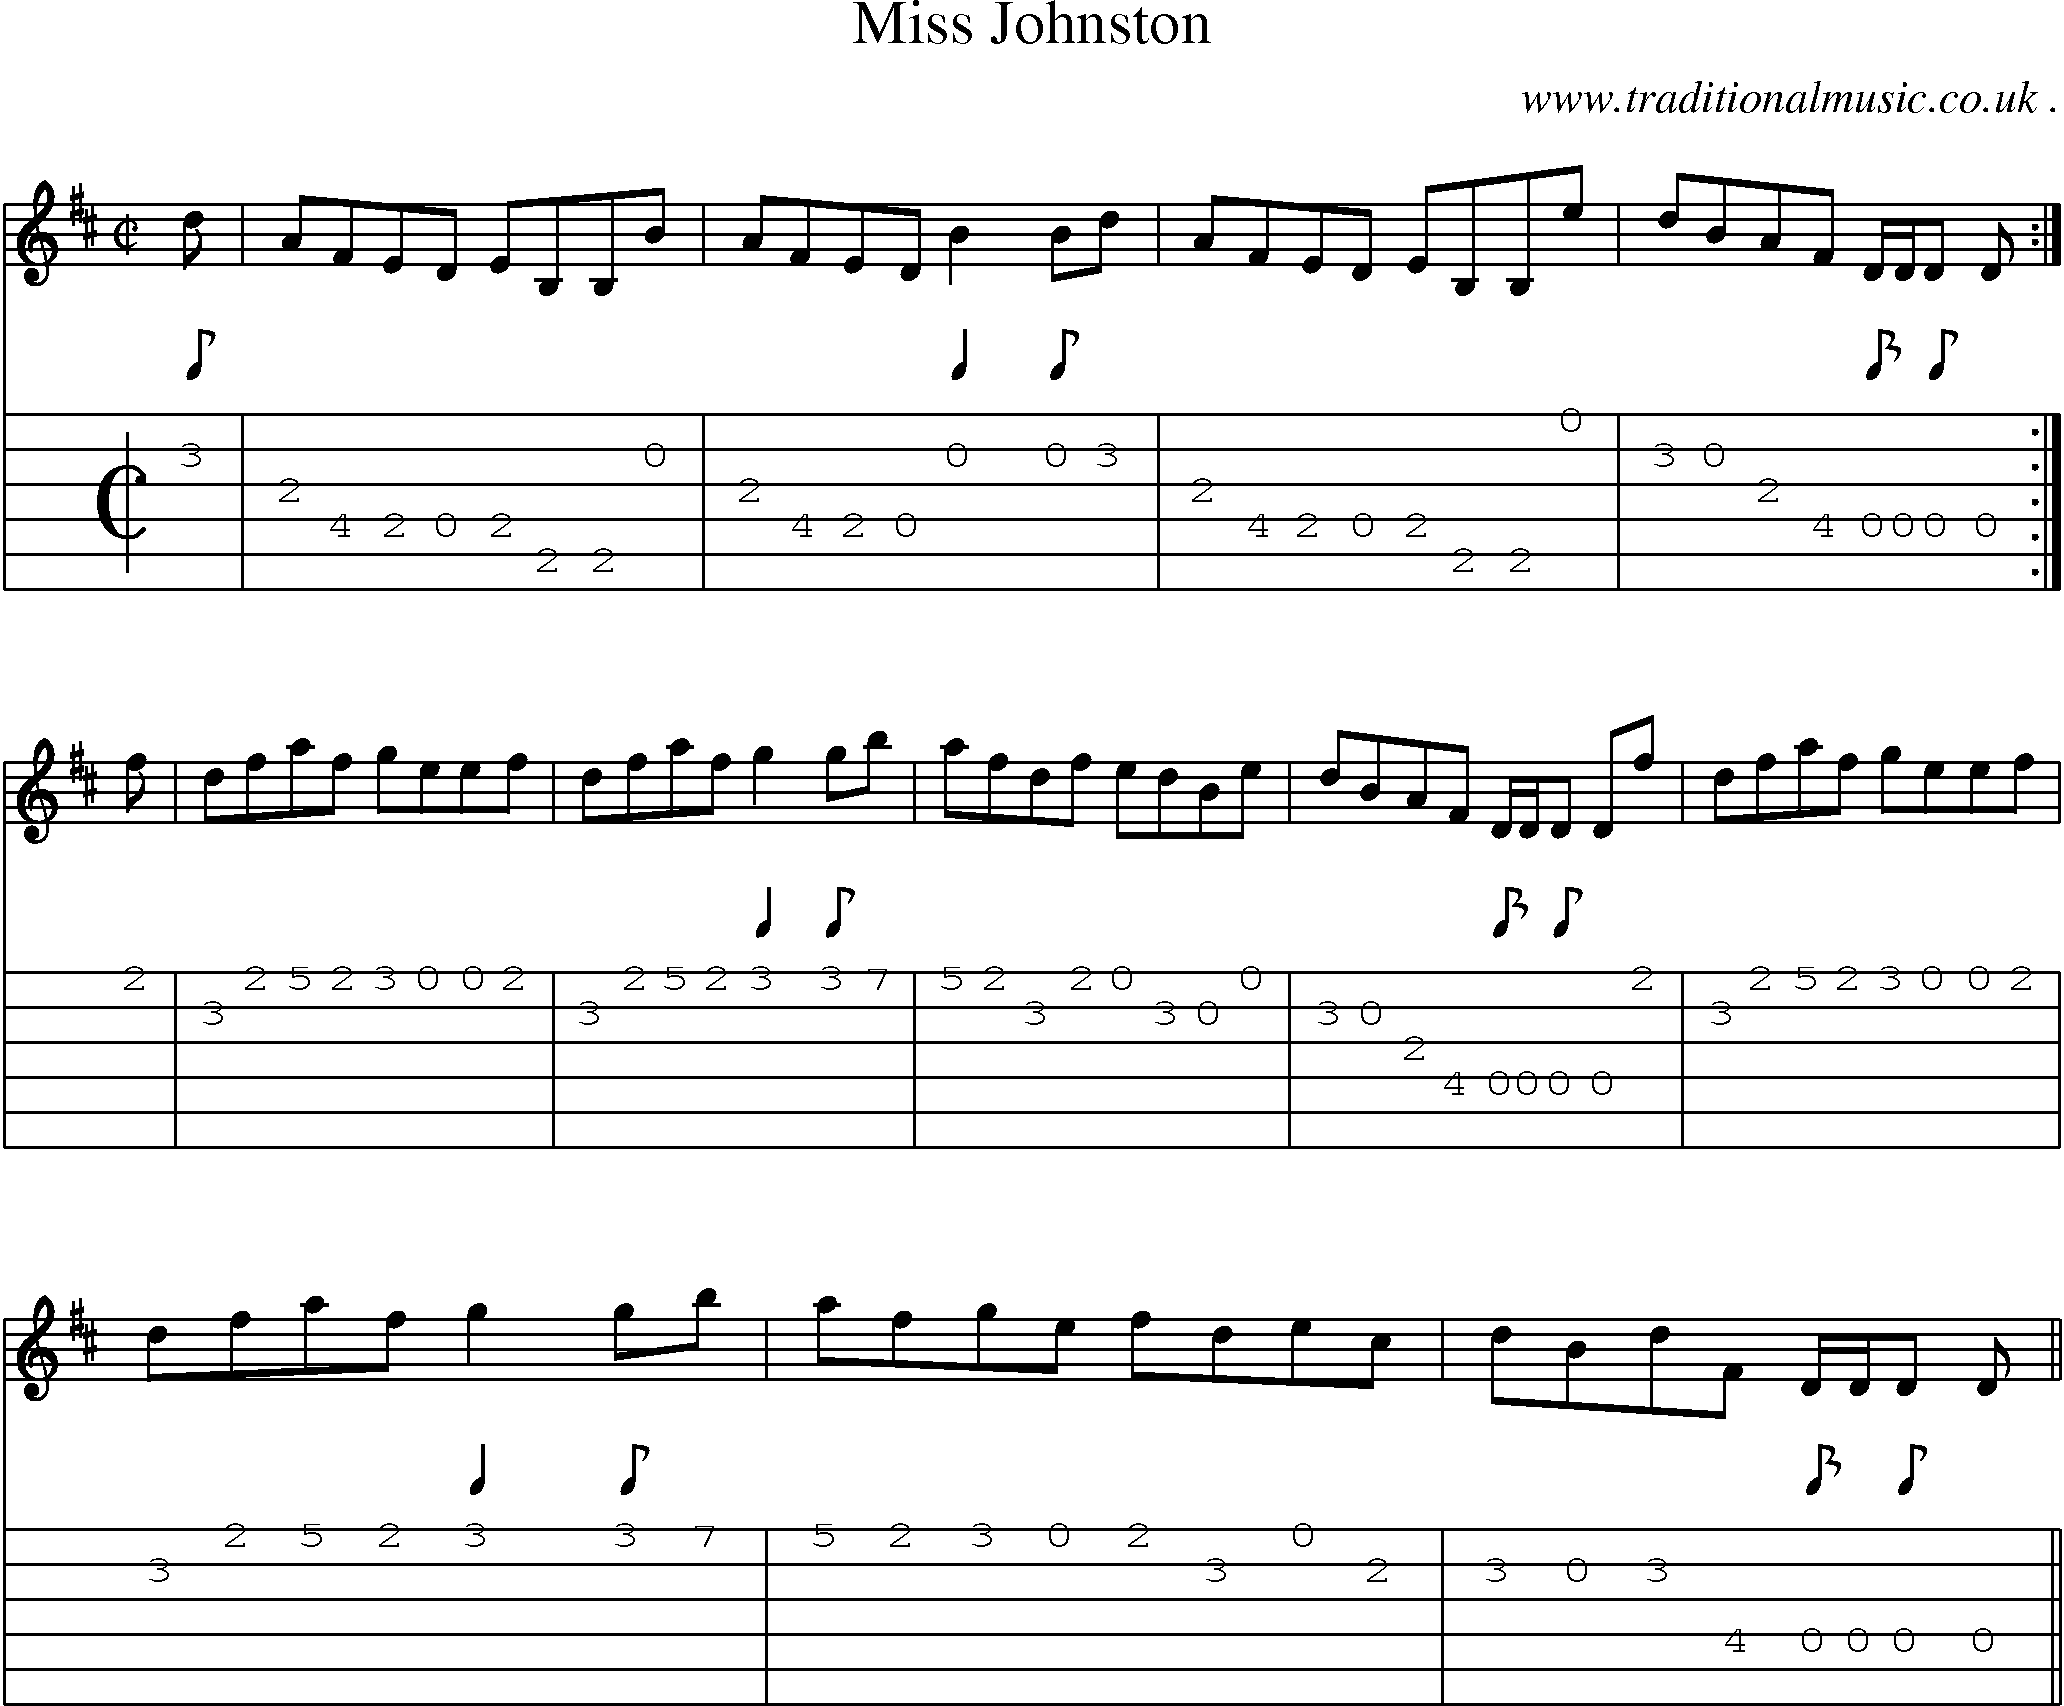 Sheet-music  score, Chords and Guitar Tabs for Miss Johnston